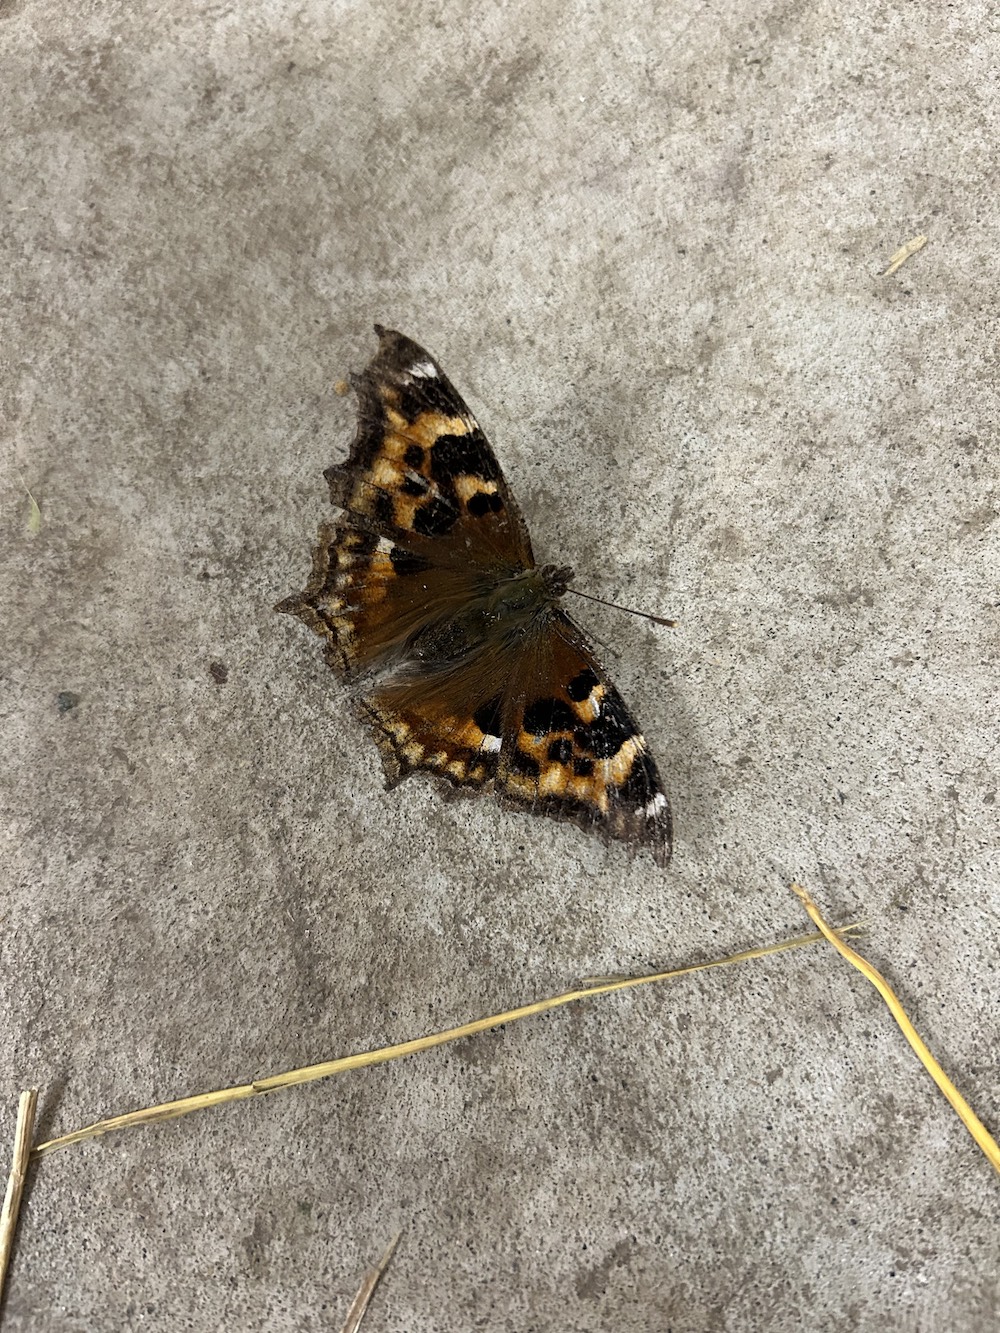 A butterfly with mottled dark brown, yellow, orange and white wings rests on a concrete floor.